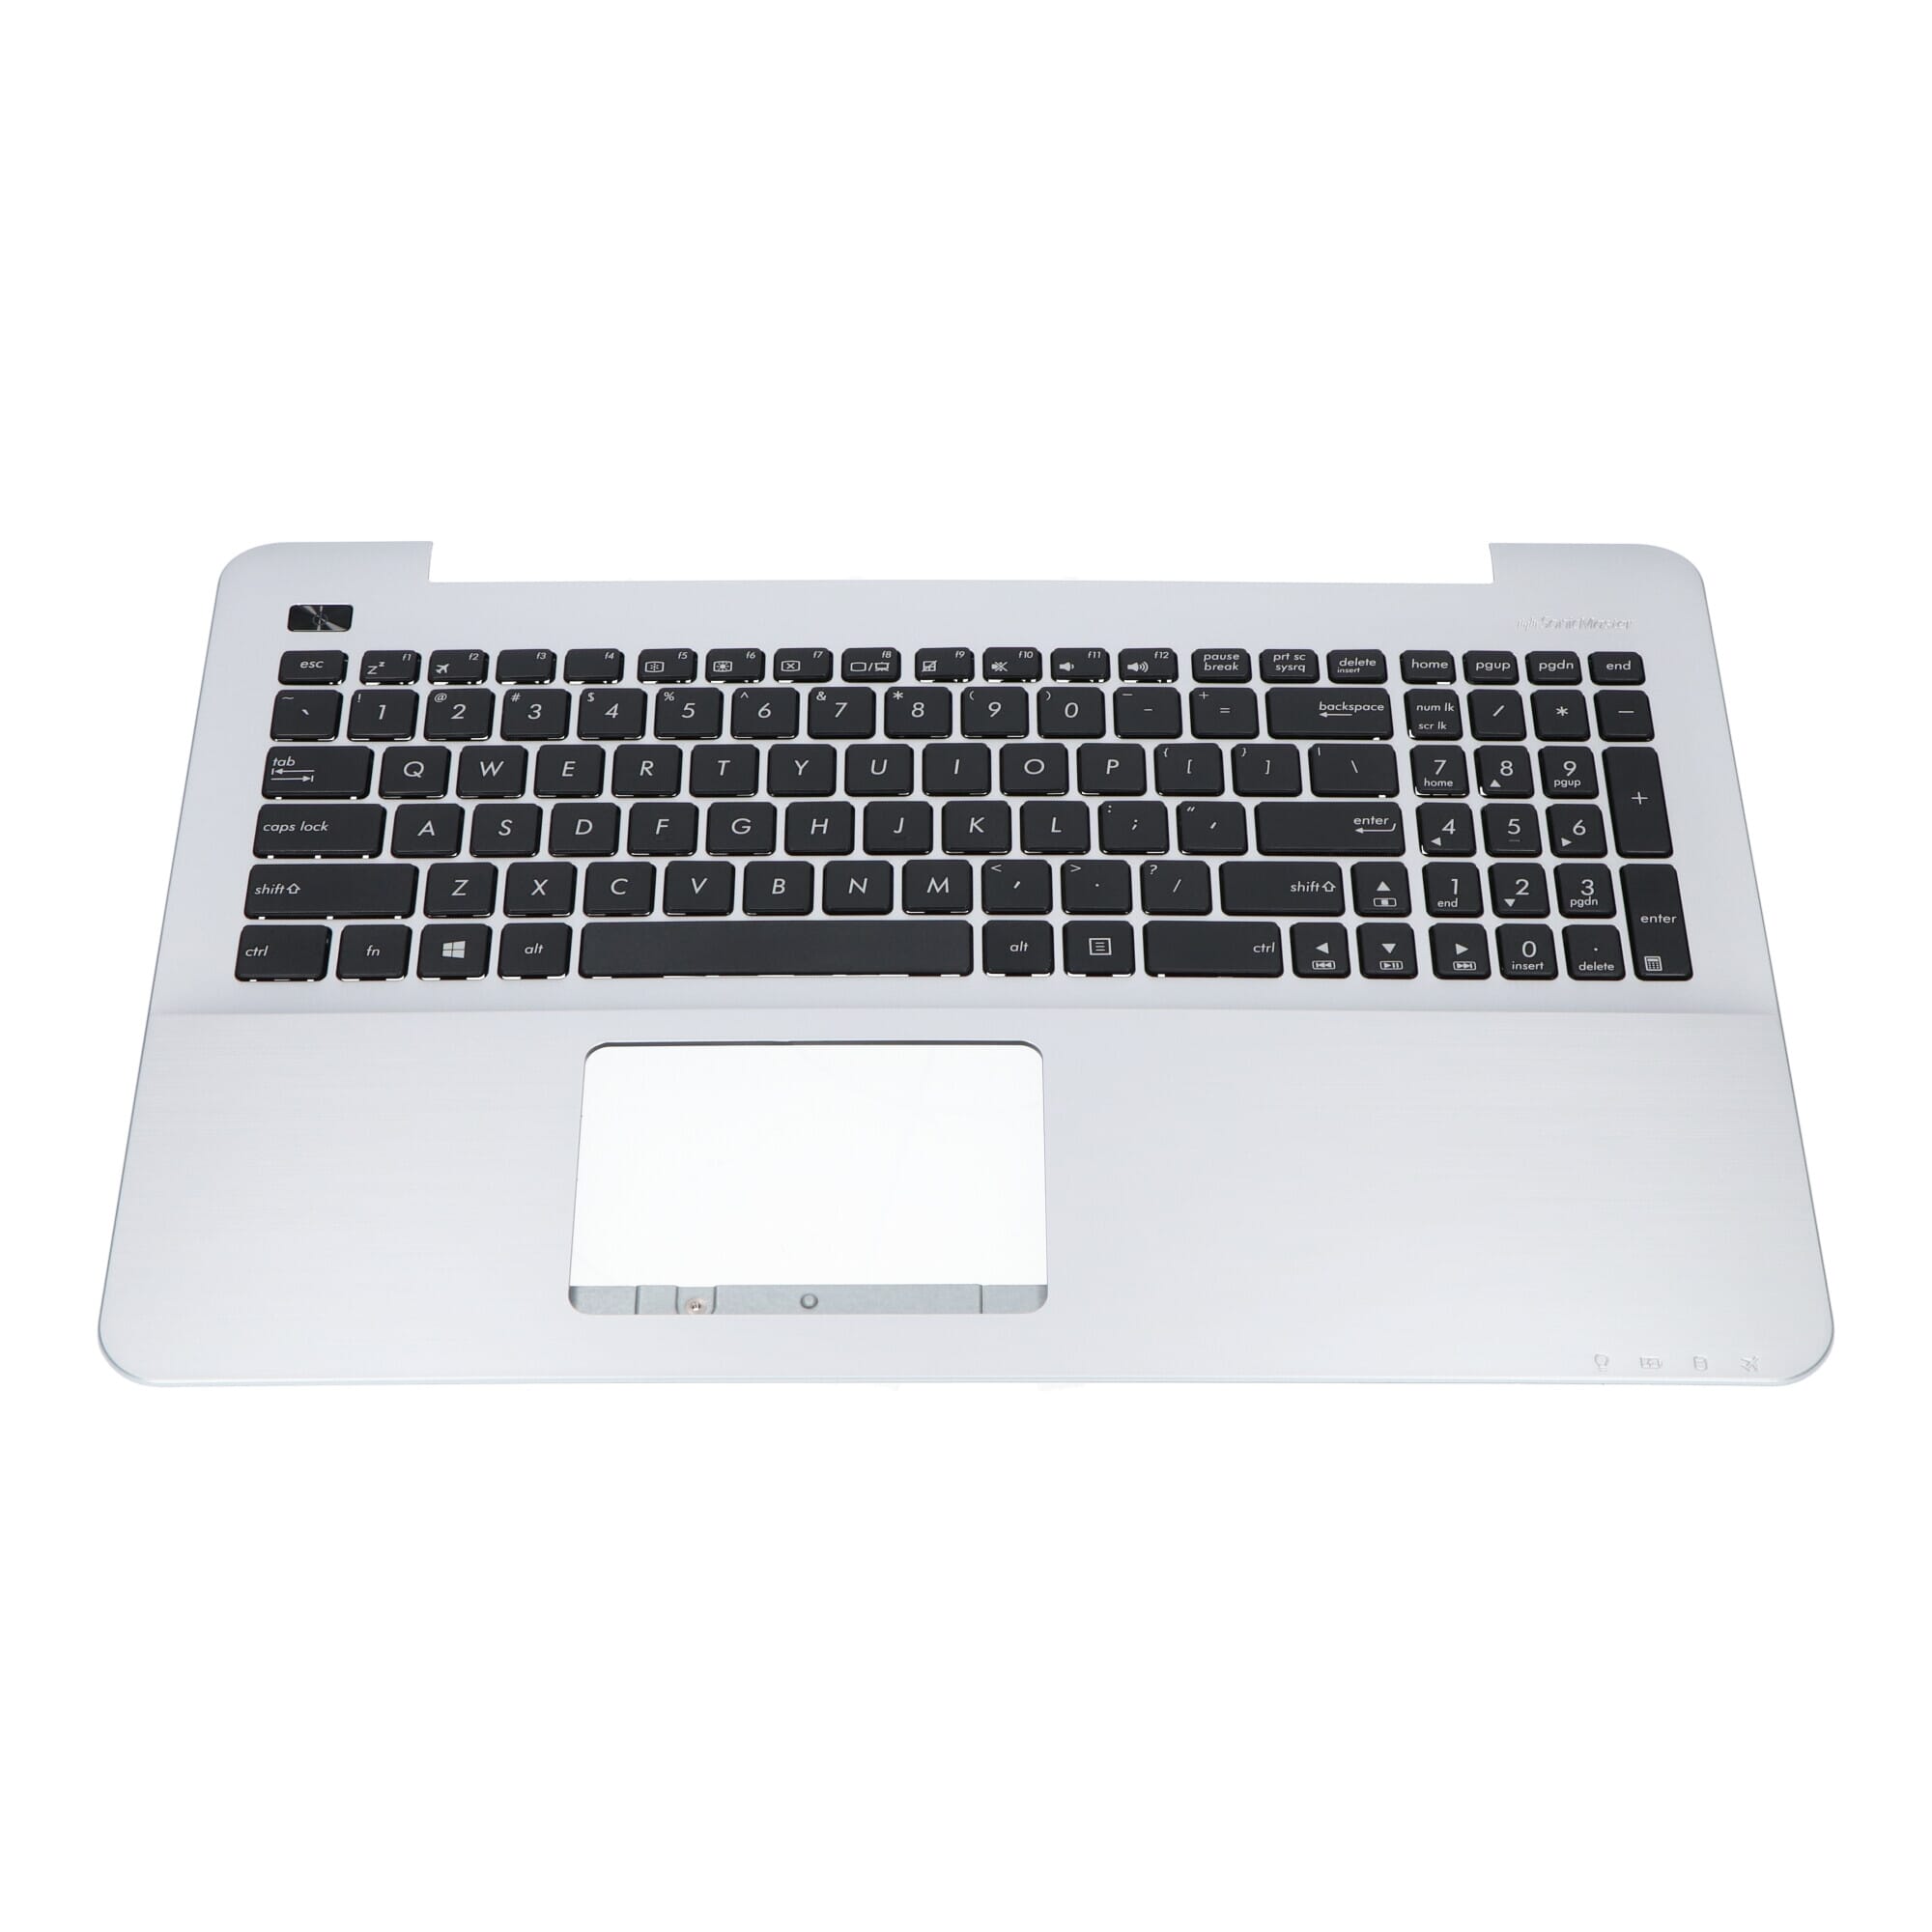 Beschrijving nakoming modder Asus Laptop Toetsenbord Qwerty US + Top Cover (90NB0622-R31US0) -  ReplaceDirect.nl